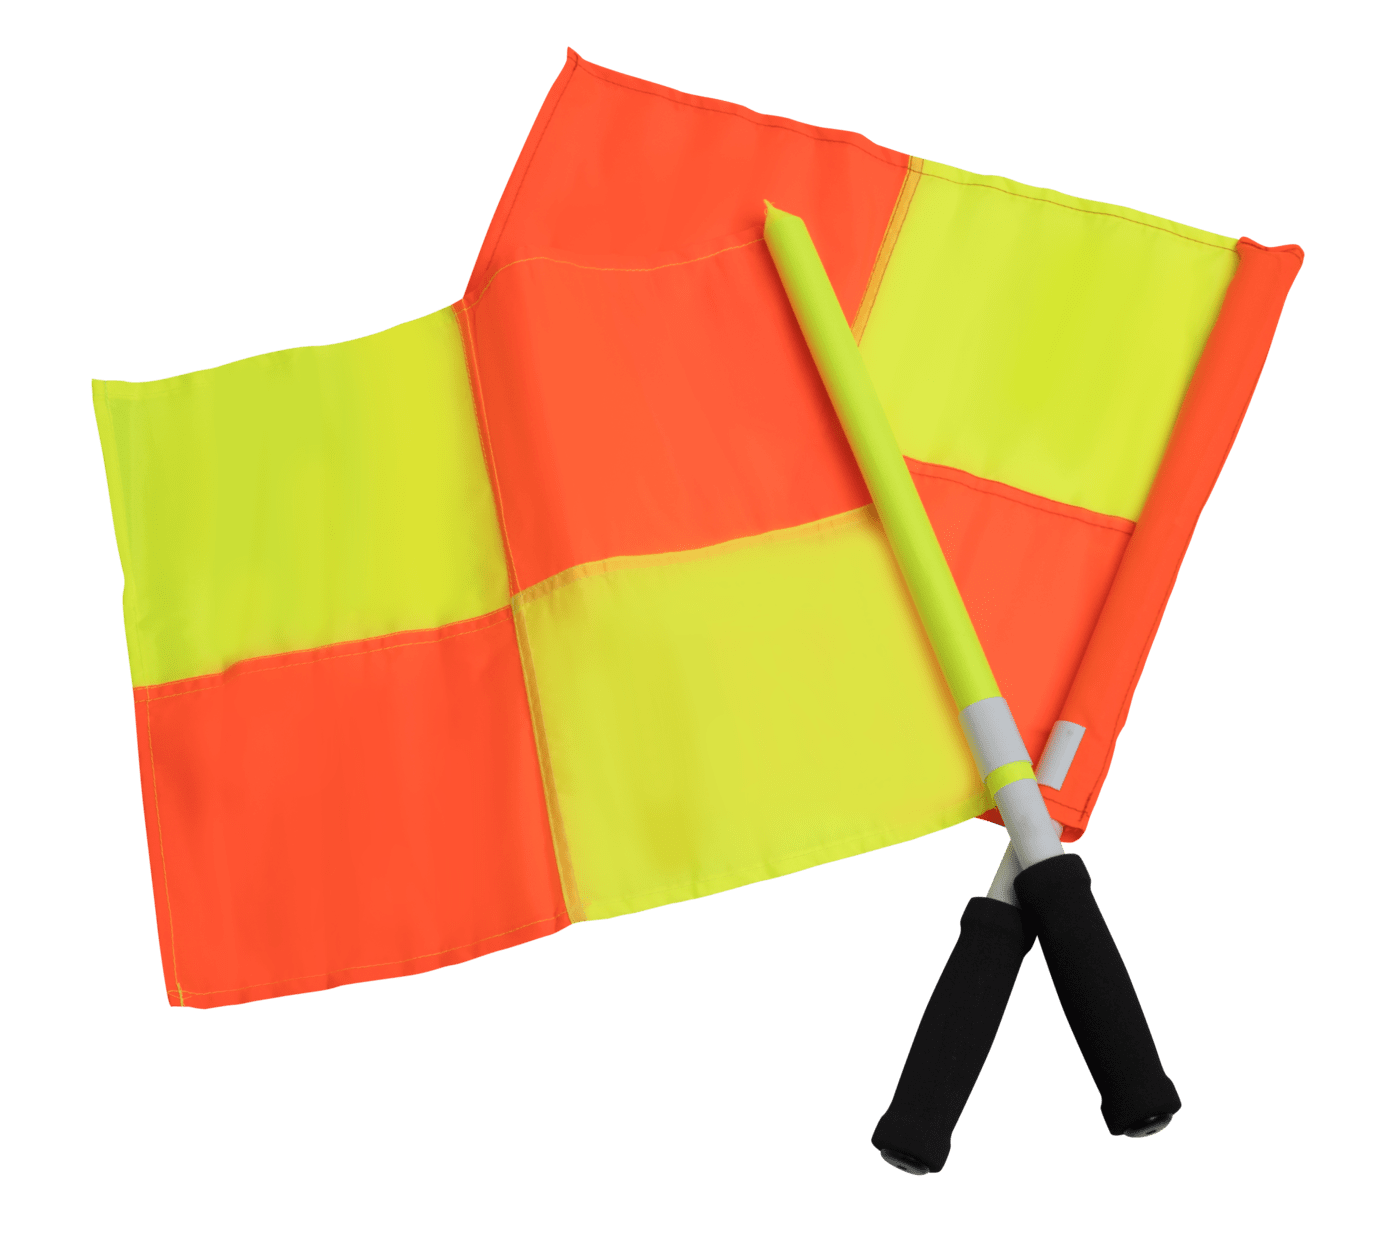 820027_red-yellow_Linesman_flag_Classic_2_pcs_Amateur